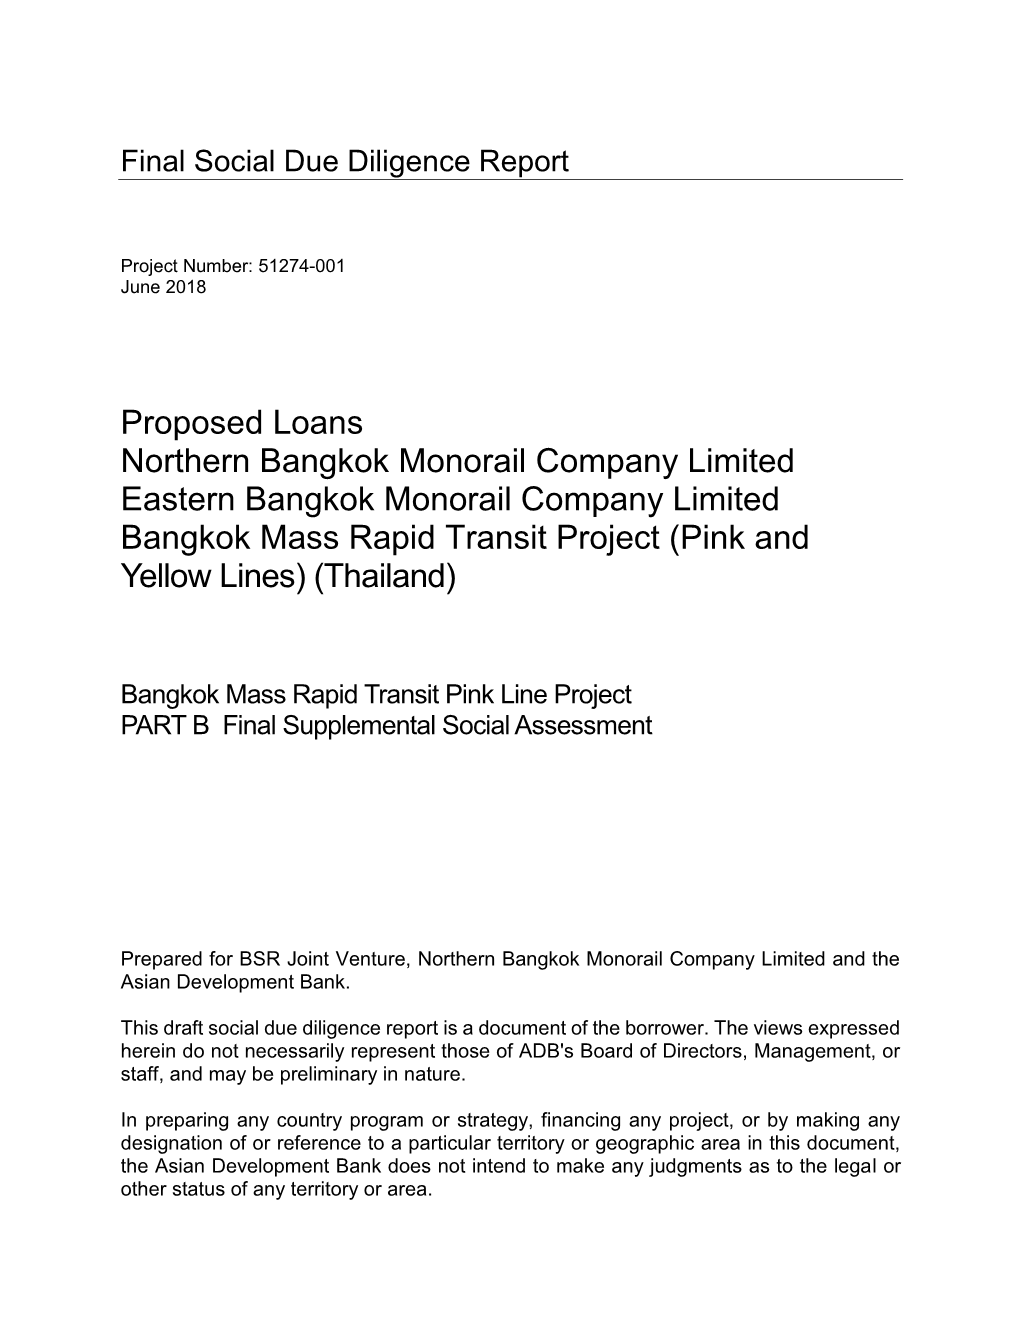 Proposed Loans Northern Bangkok Monorail Company Limited Eastern